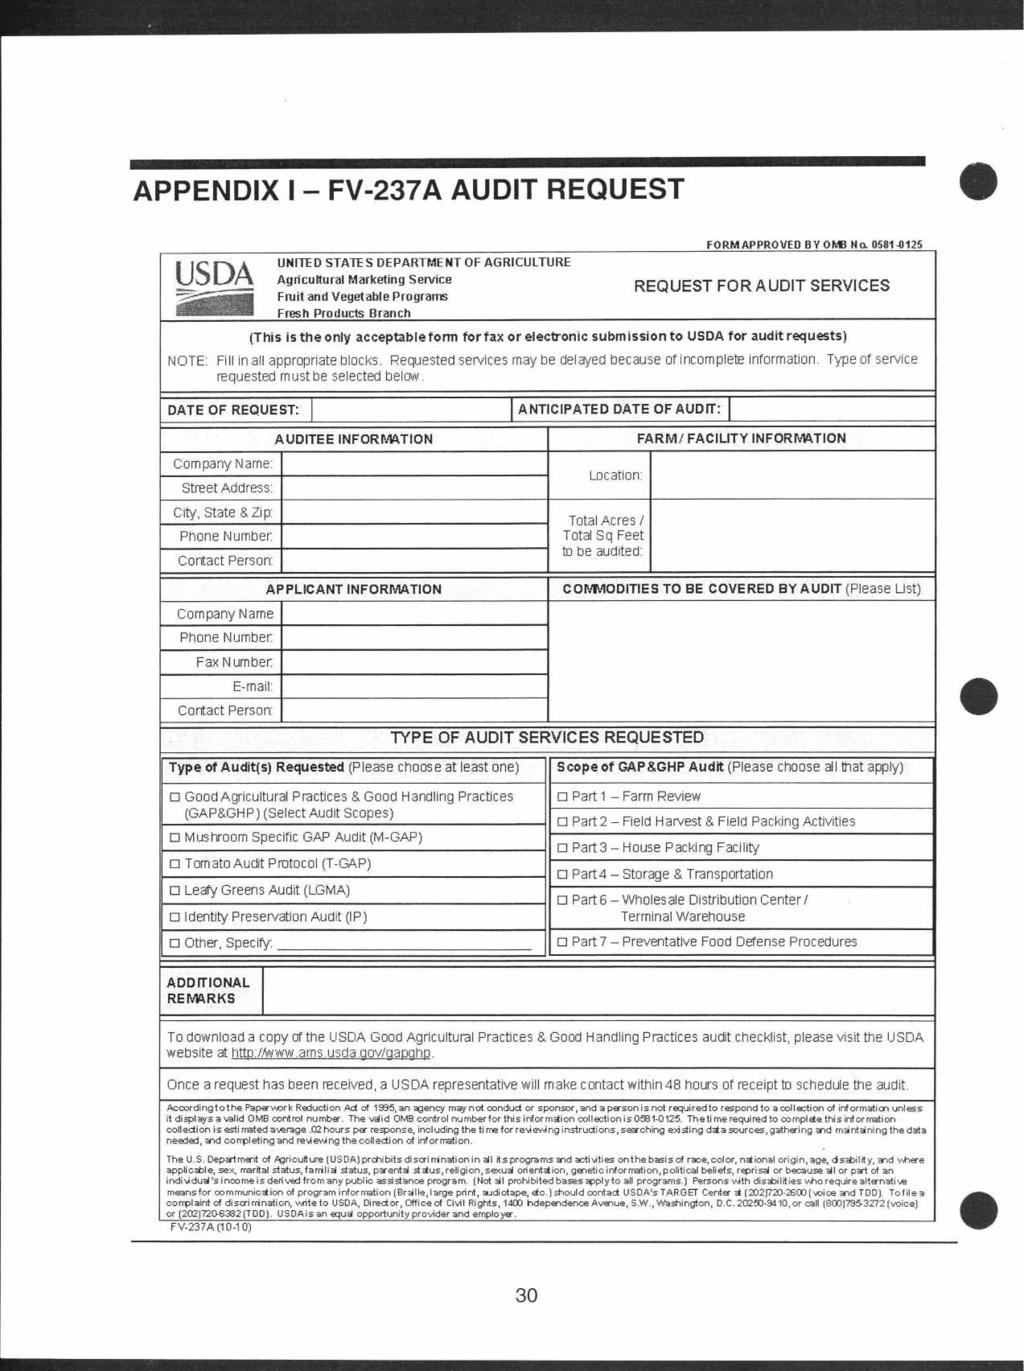 APPENDIX I - FV-237A AUDIT REQUEST UNITED STATES DEPARTMENT OF AGRICULTURE FORM APPROVED BY OM No. 0581-8125 US IIM Agricultural Marketing Service ==---.